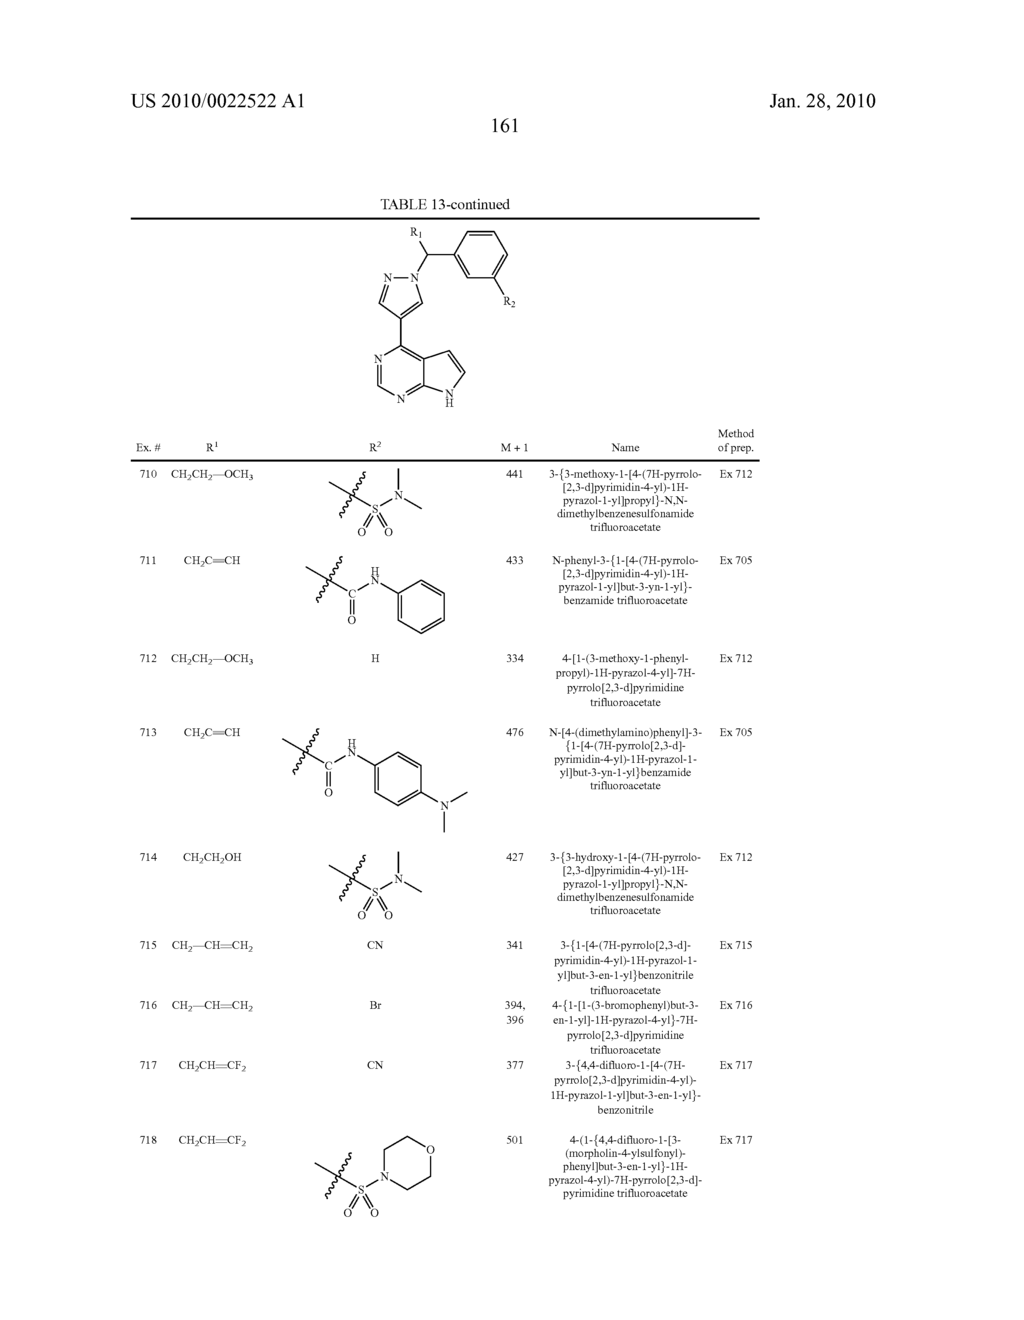 HETEROARYL SUBSTITUTED PYRROLO[2,3-b]PYRIDINES AND PYRROLO[2,3-b]PYRIMIDINES AS JANUS KINASE INHIBITORS - diagram, schematic, and image 162